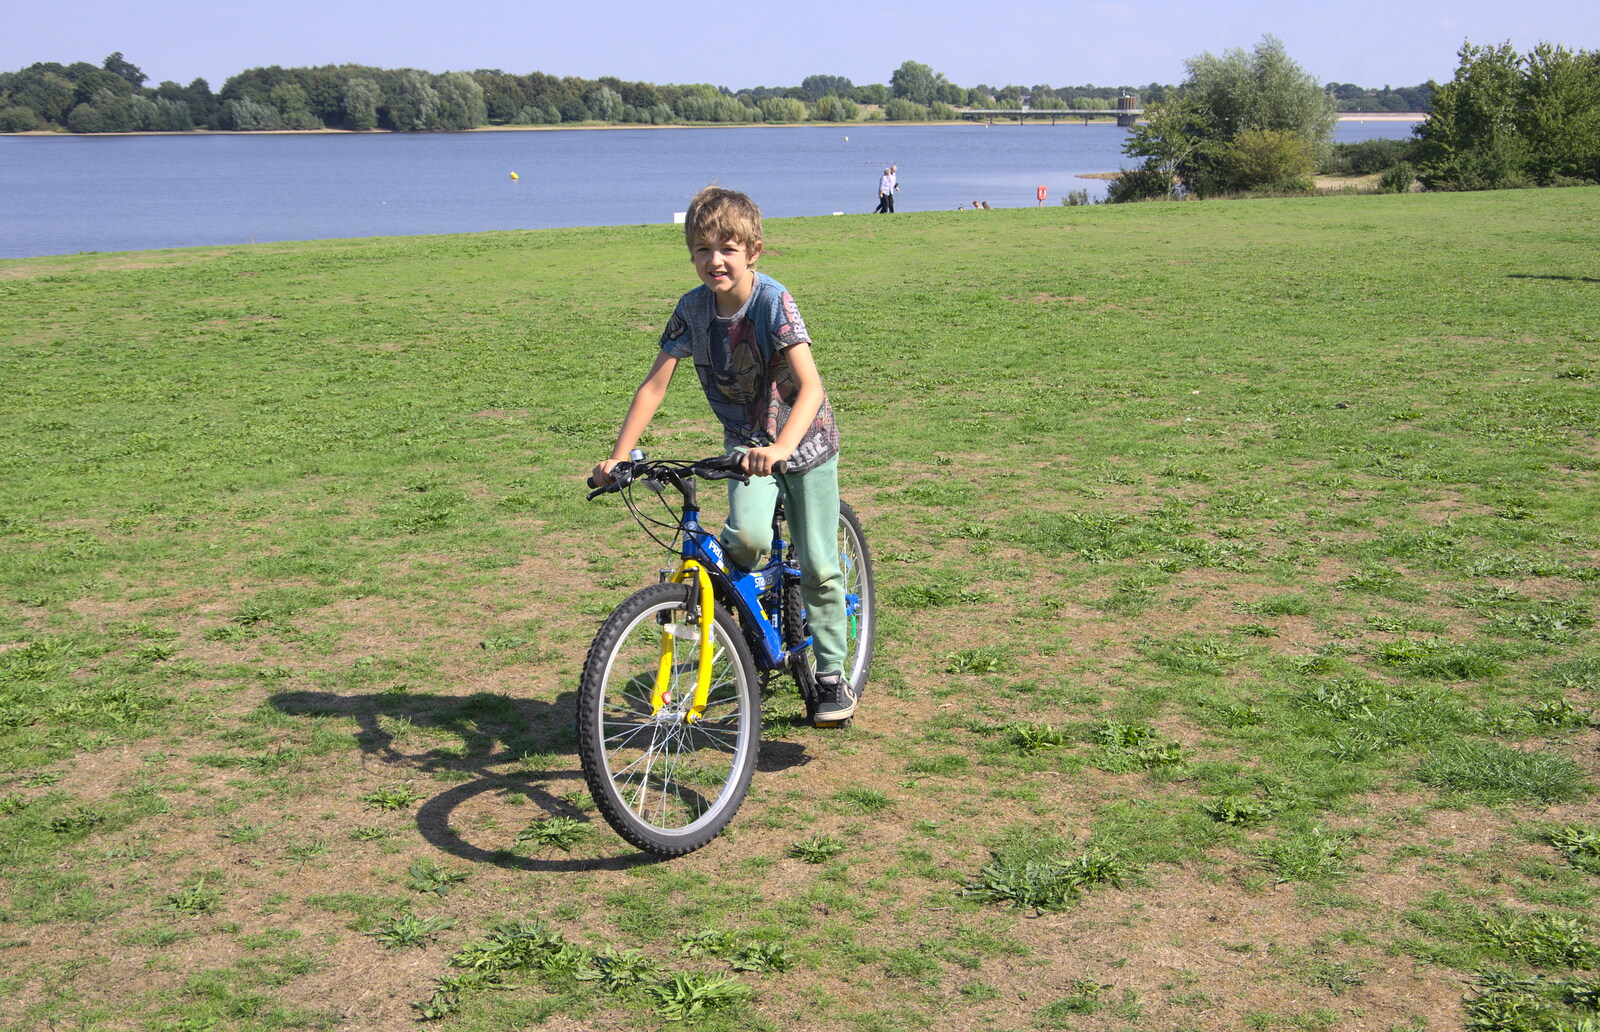 Fred on his bike, down by the resevoir from A Spot of Camping, Alton Water, Stutton, Suffolk - 1st September 2018